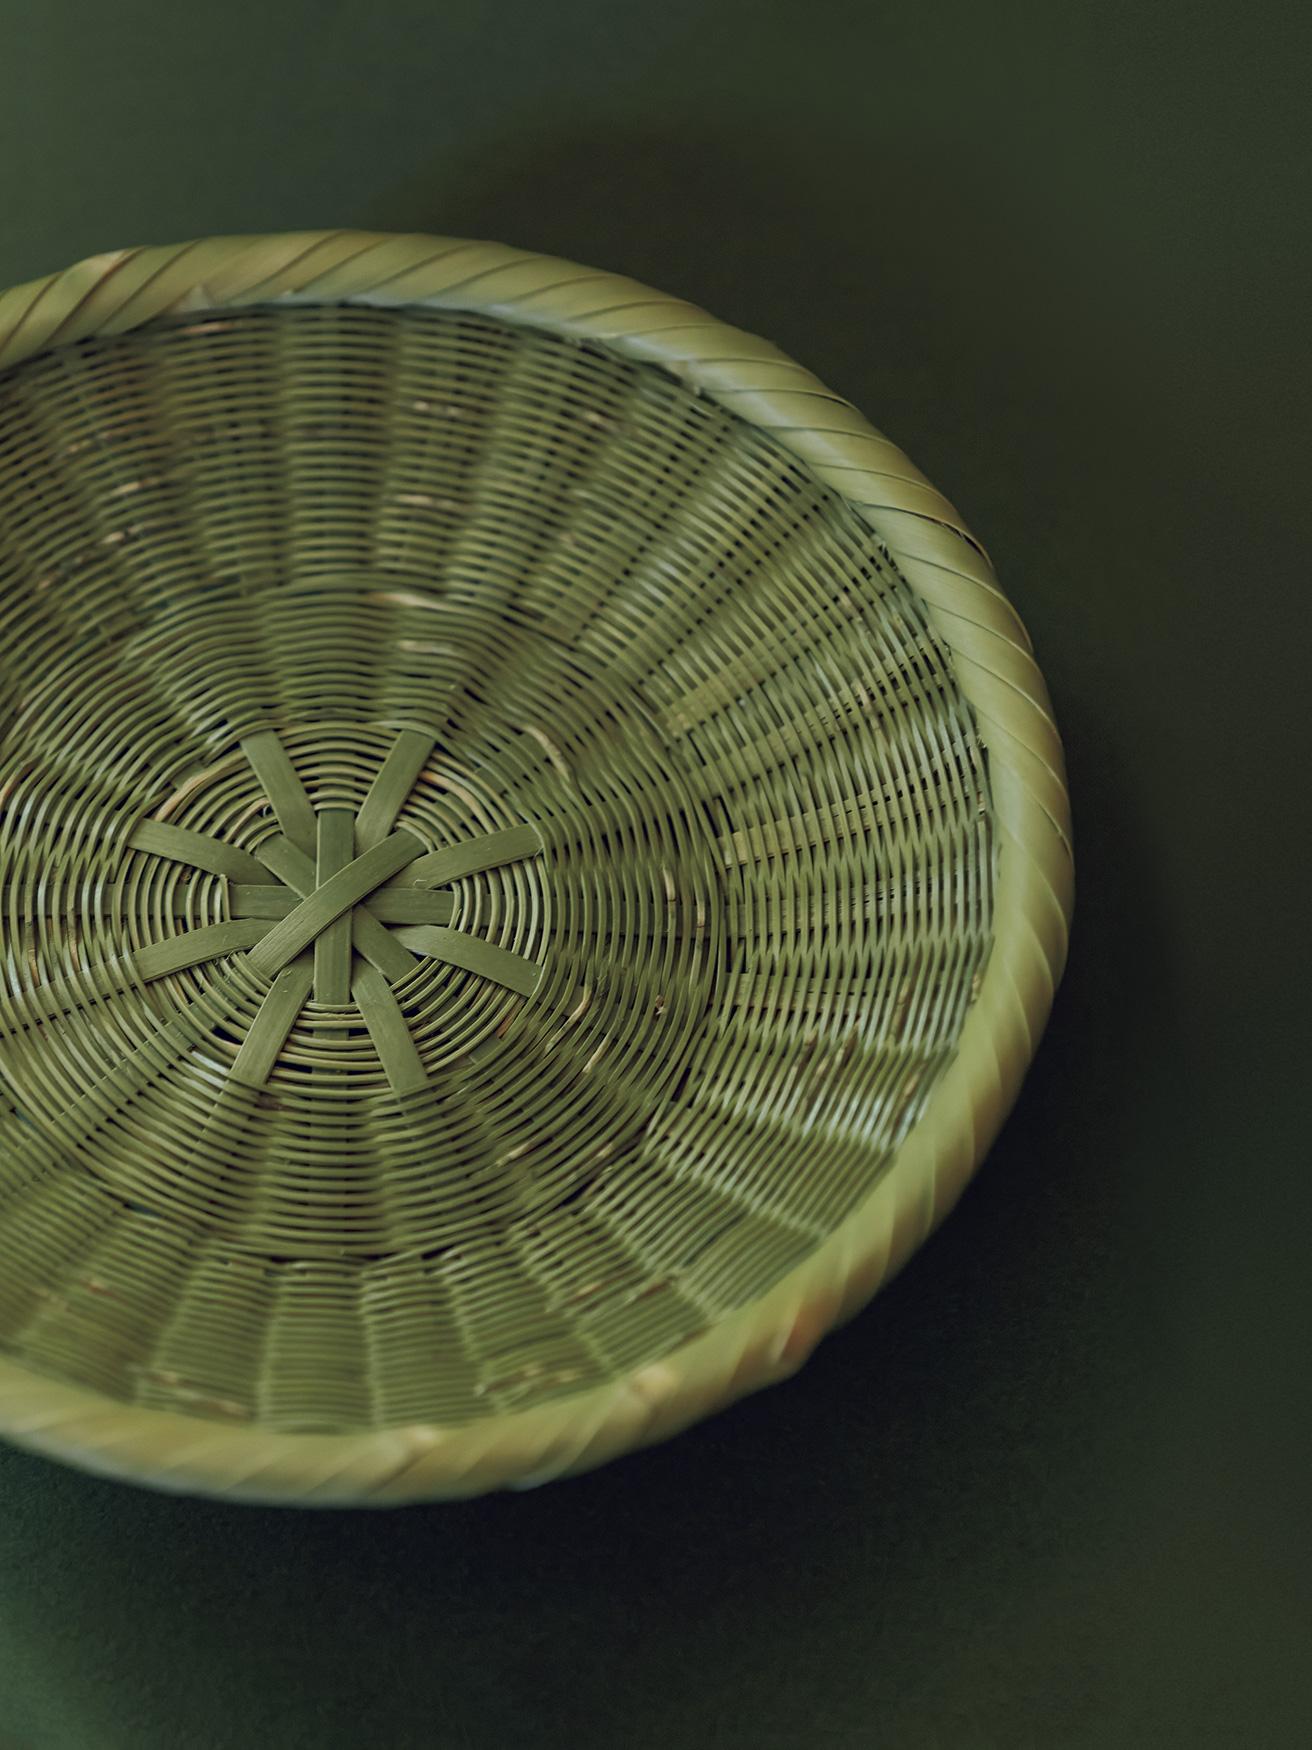 Purchase No. 64【Bamboo Colander】A tool for everyday life made of lush green bamboo, cut by the crafter himself.